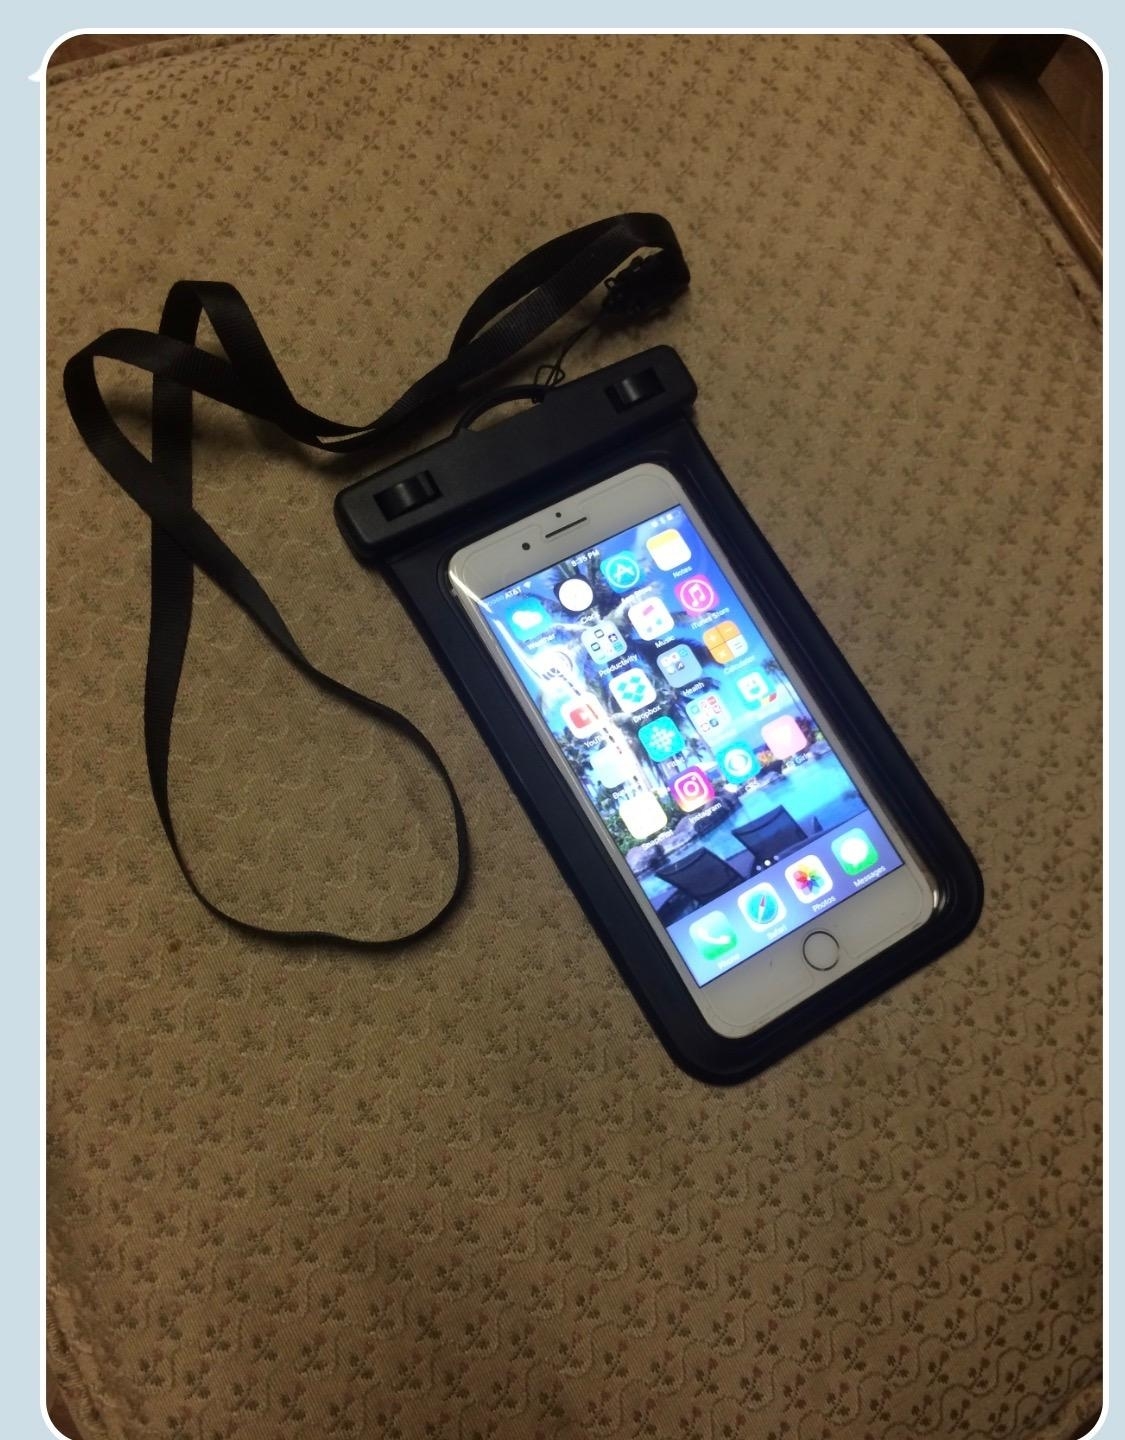 Smartphone in a waterproof case with a neck strap, on a patterned fabric surface